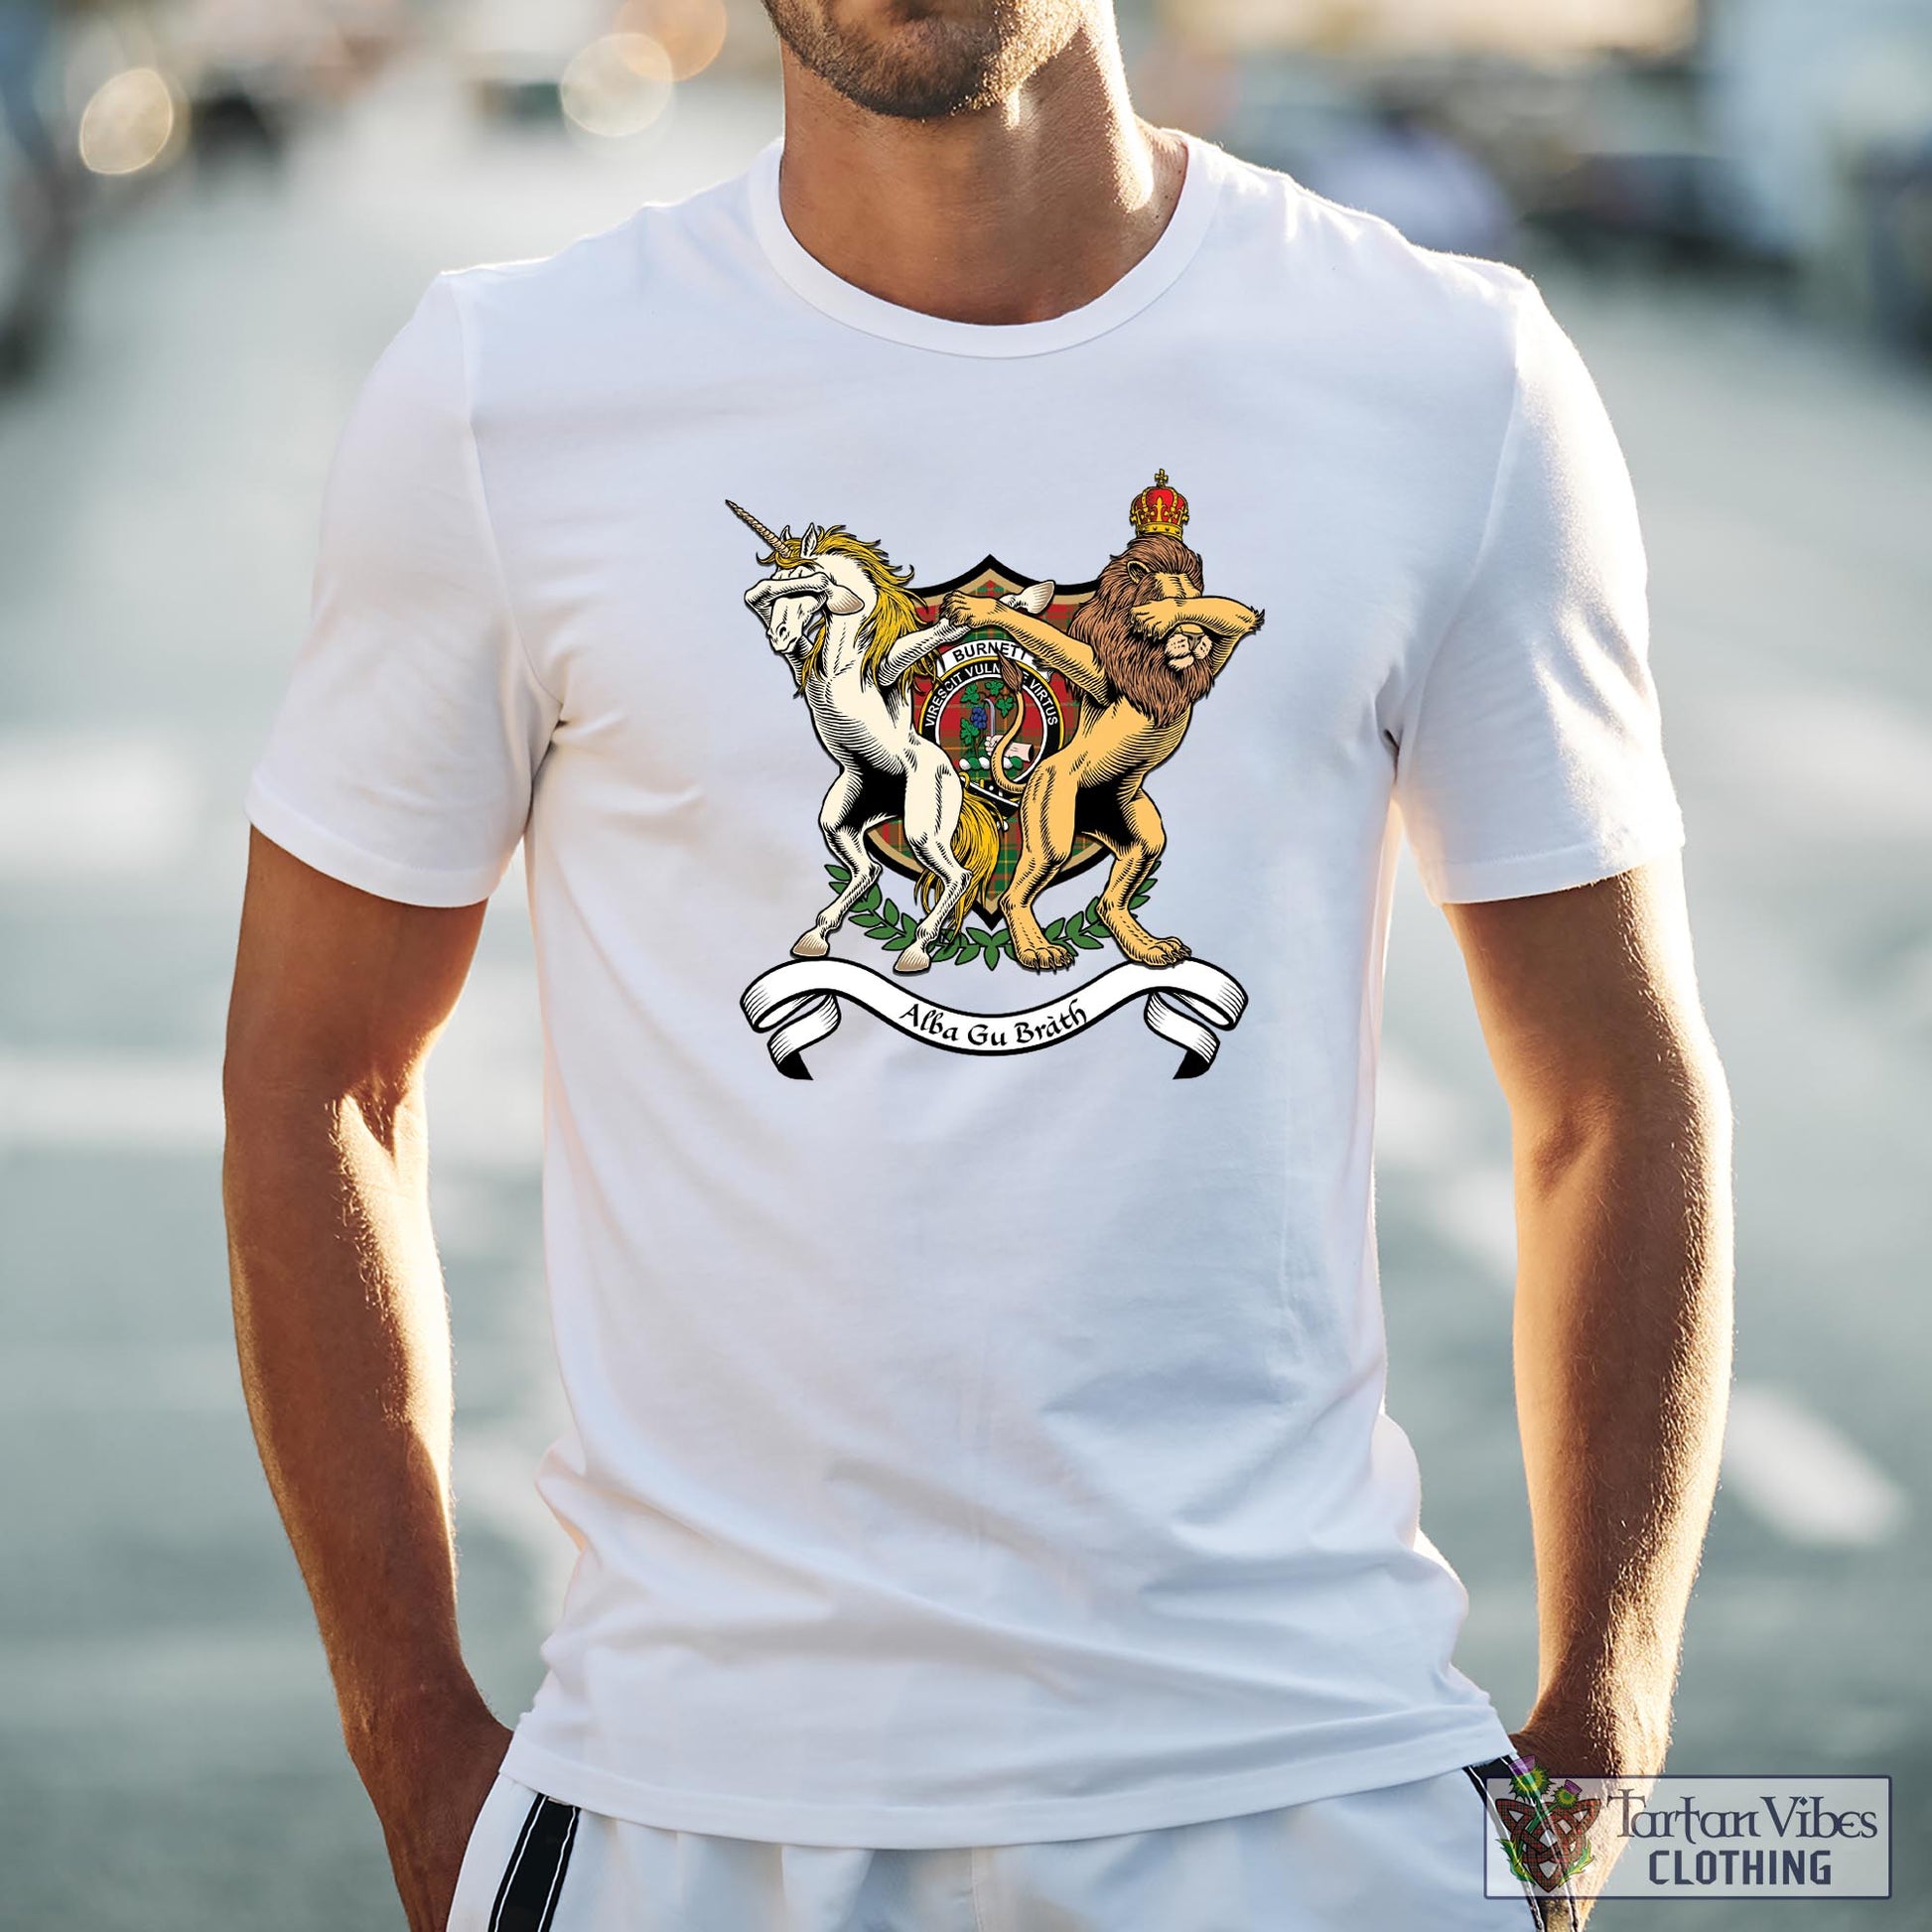 Tartan Vibes Clothing Burnett Ancient Family Crest Cotton Men's T-Shirt with Scotland Royal Coat Of Arm Funny Style